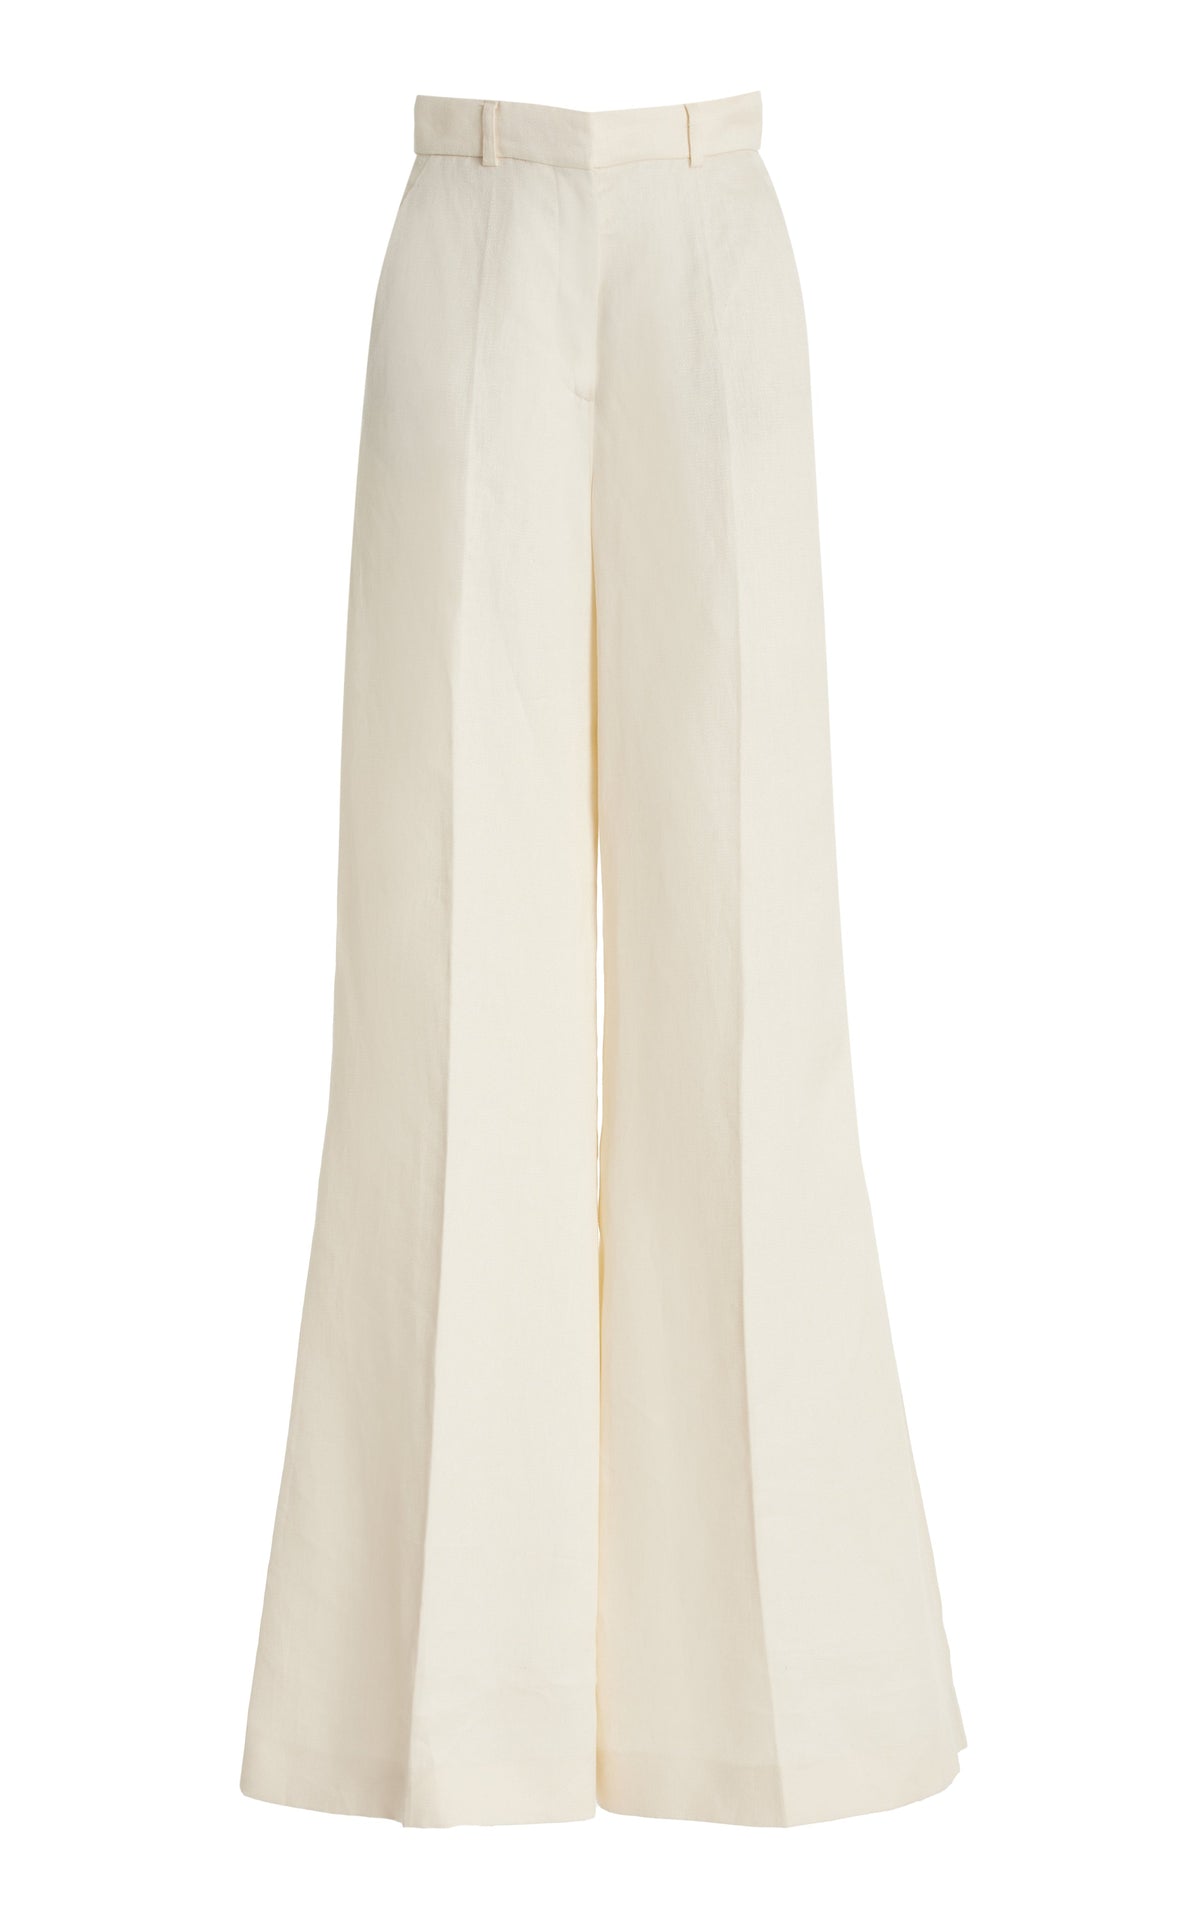 Mabon Pant in Ivory Linen